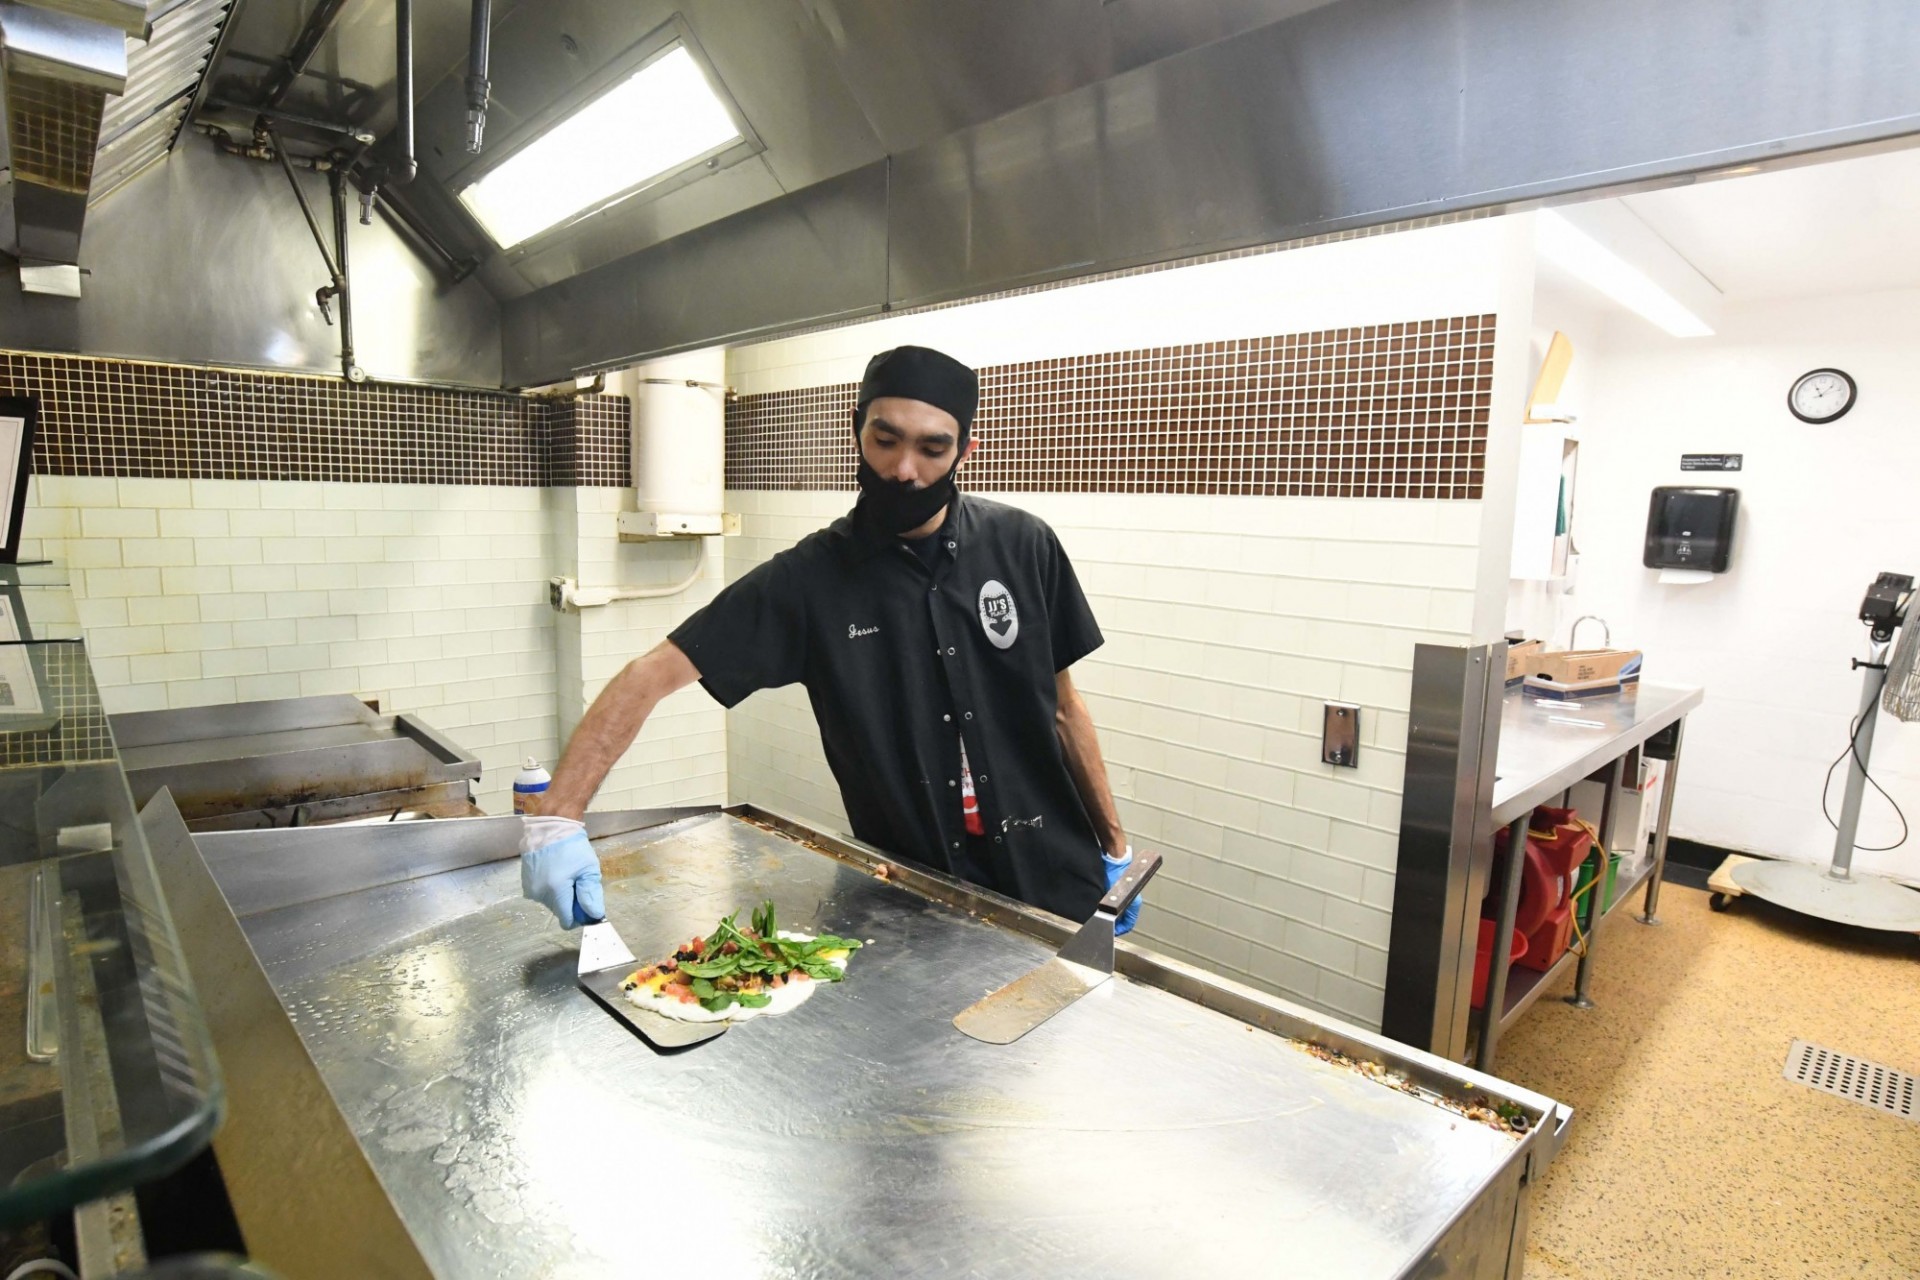 A man in a black Dining uniform wearing a mask prepares food on a griddle.